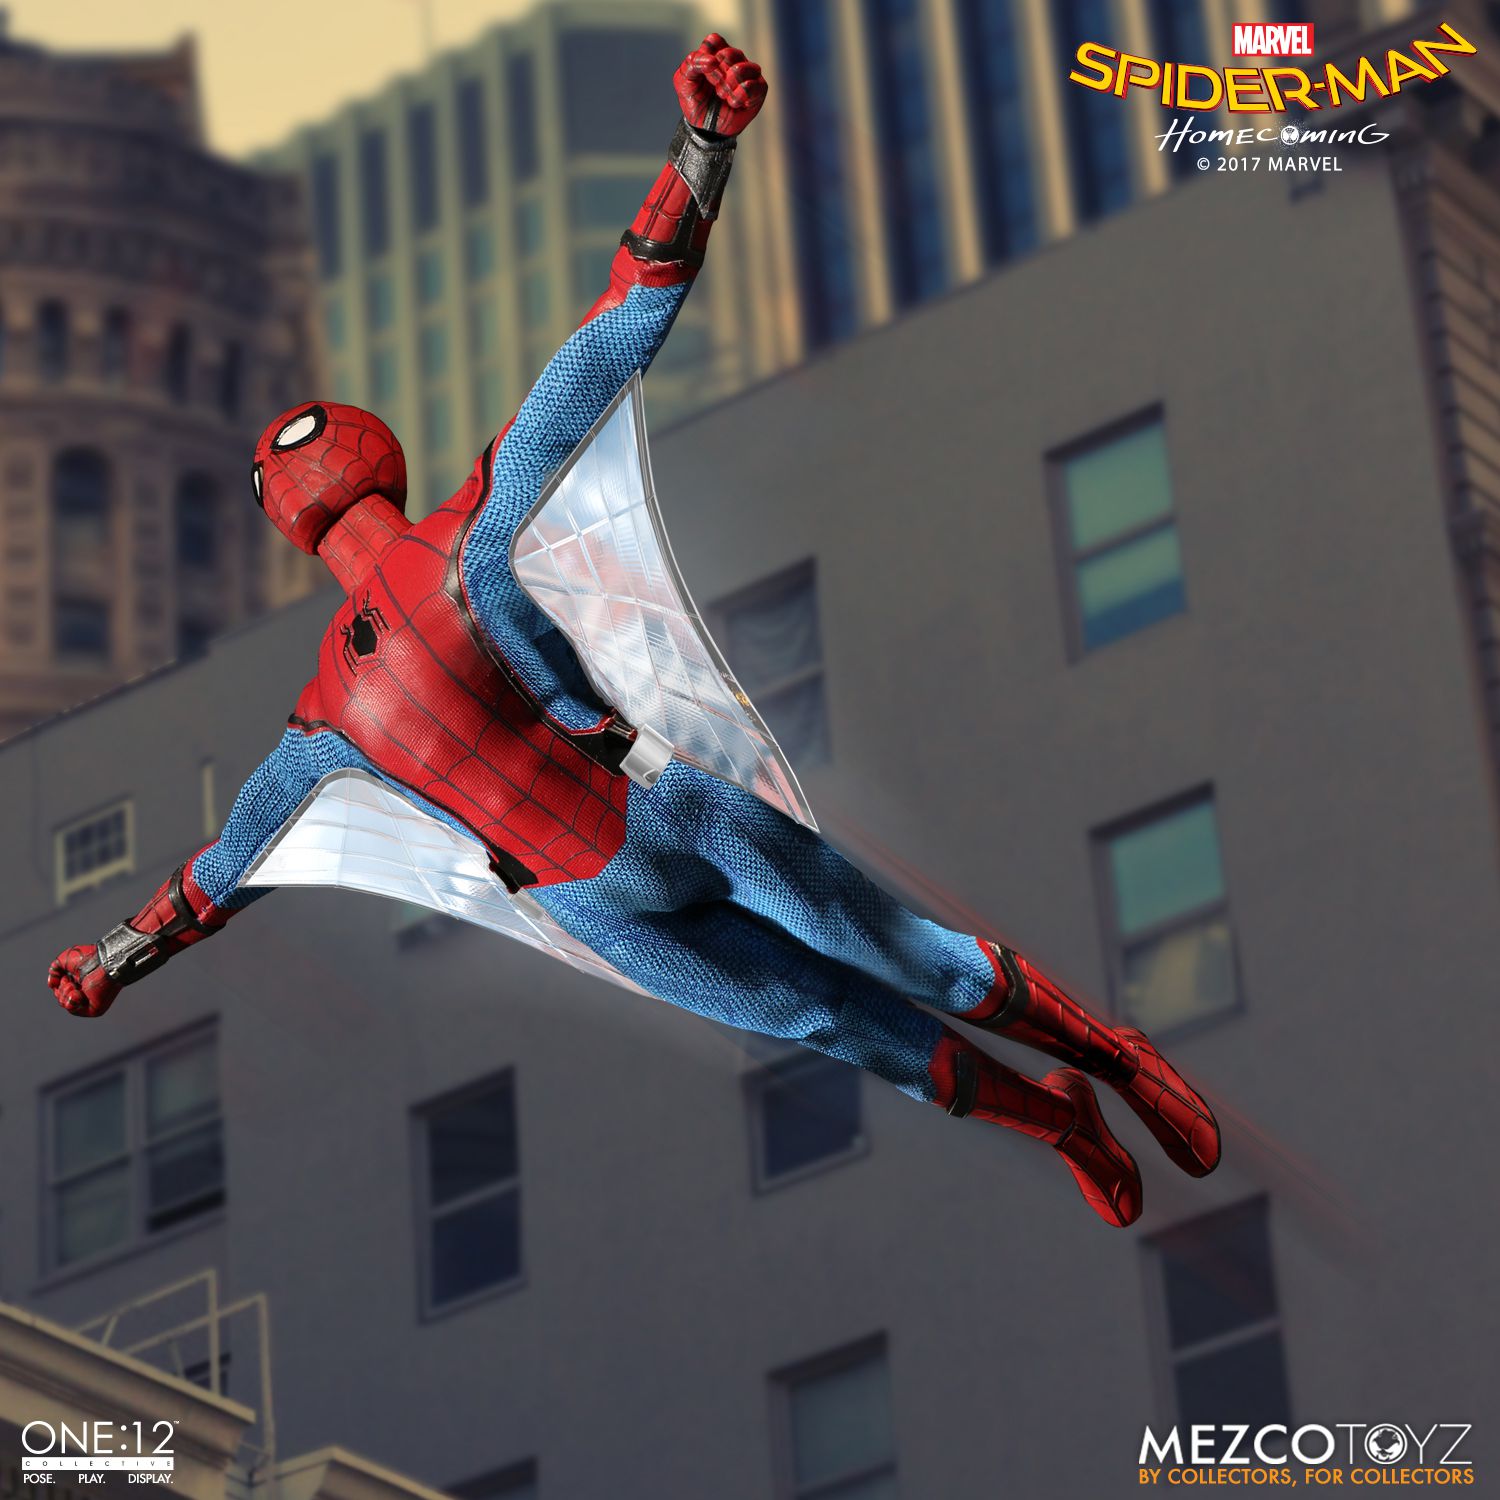 Mezco Toyz One:12 Collective Spider-Man Homecoming Marvel Comics Action Figure 